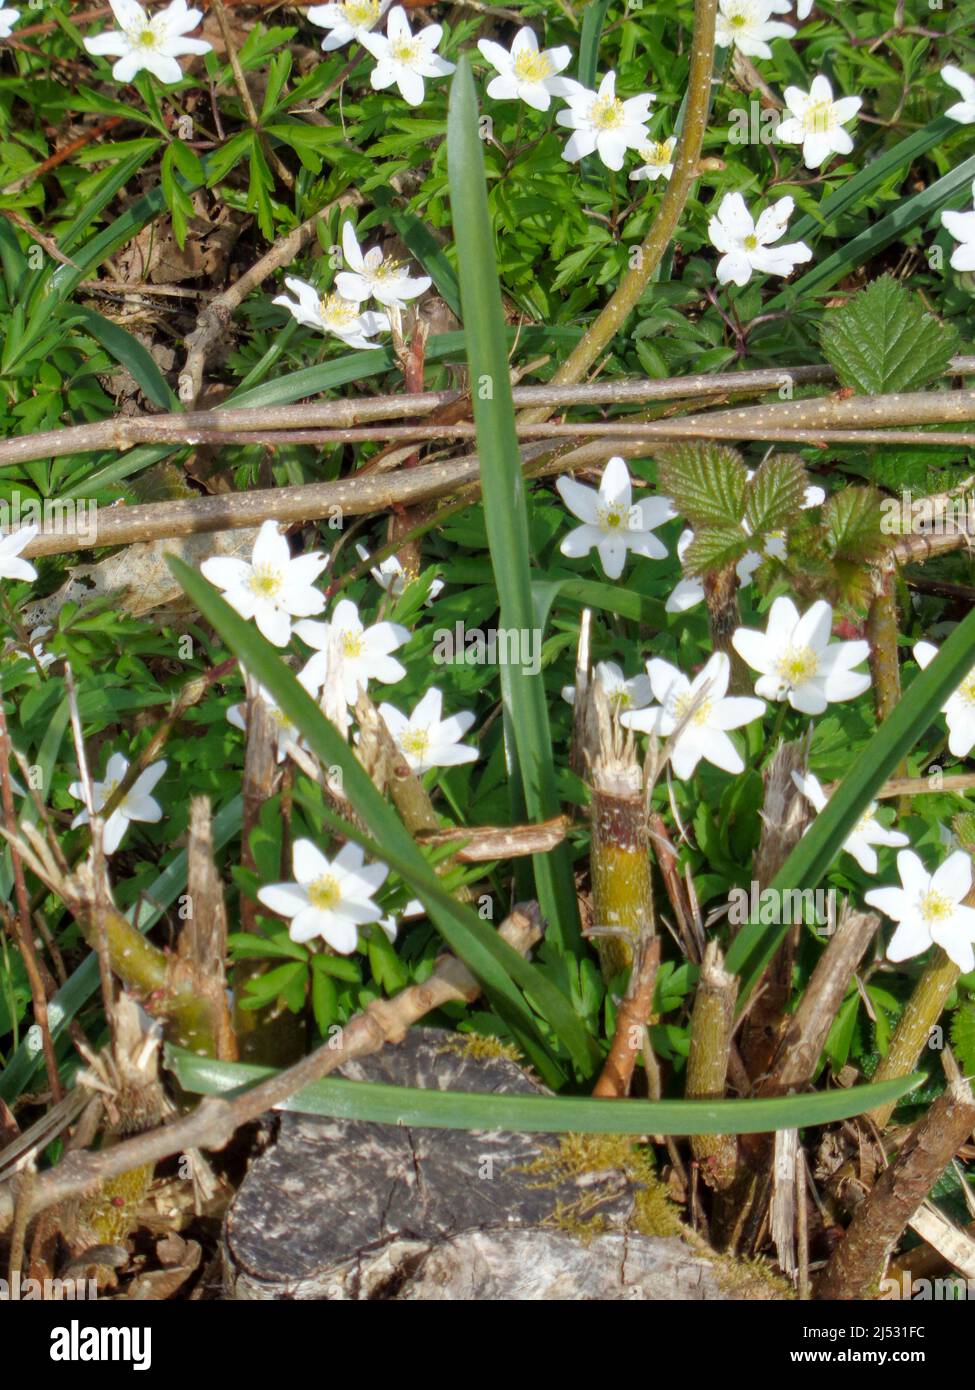 Natural spring still life of Wood anemone, Anemone nemorosa, from directly above forming an intimate  pattern with twigs and moss covered tree stump Stock Photo